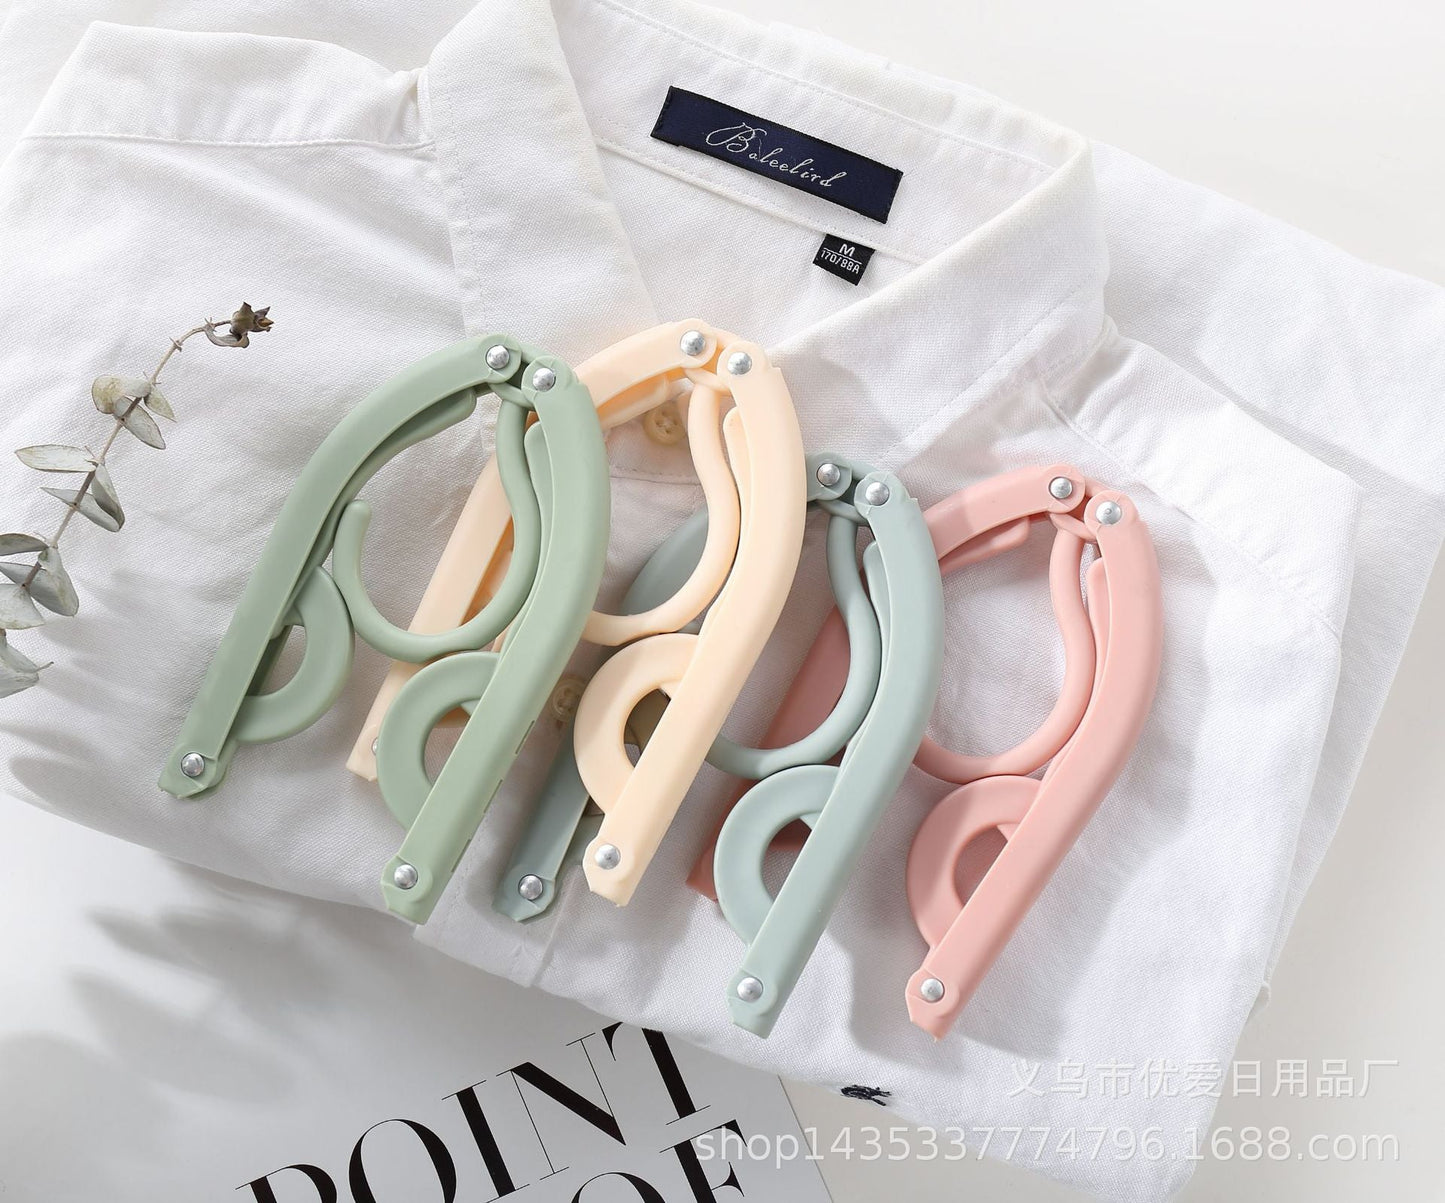 PACK OF 4 TRAVEL HANGERS